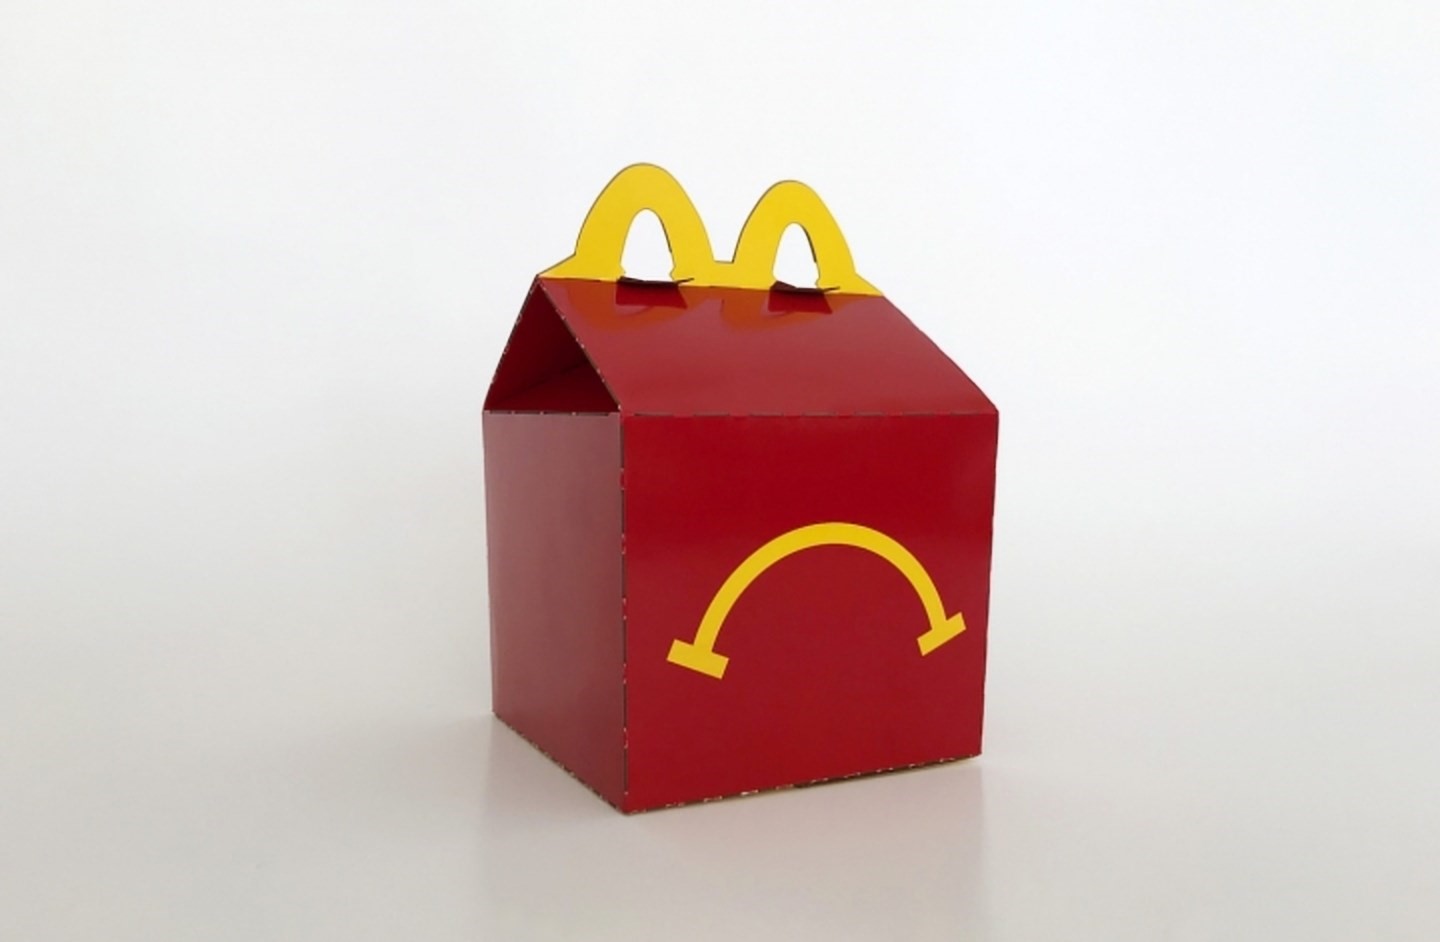 Cleaners throw away an artist's Happy Meal box sculpture